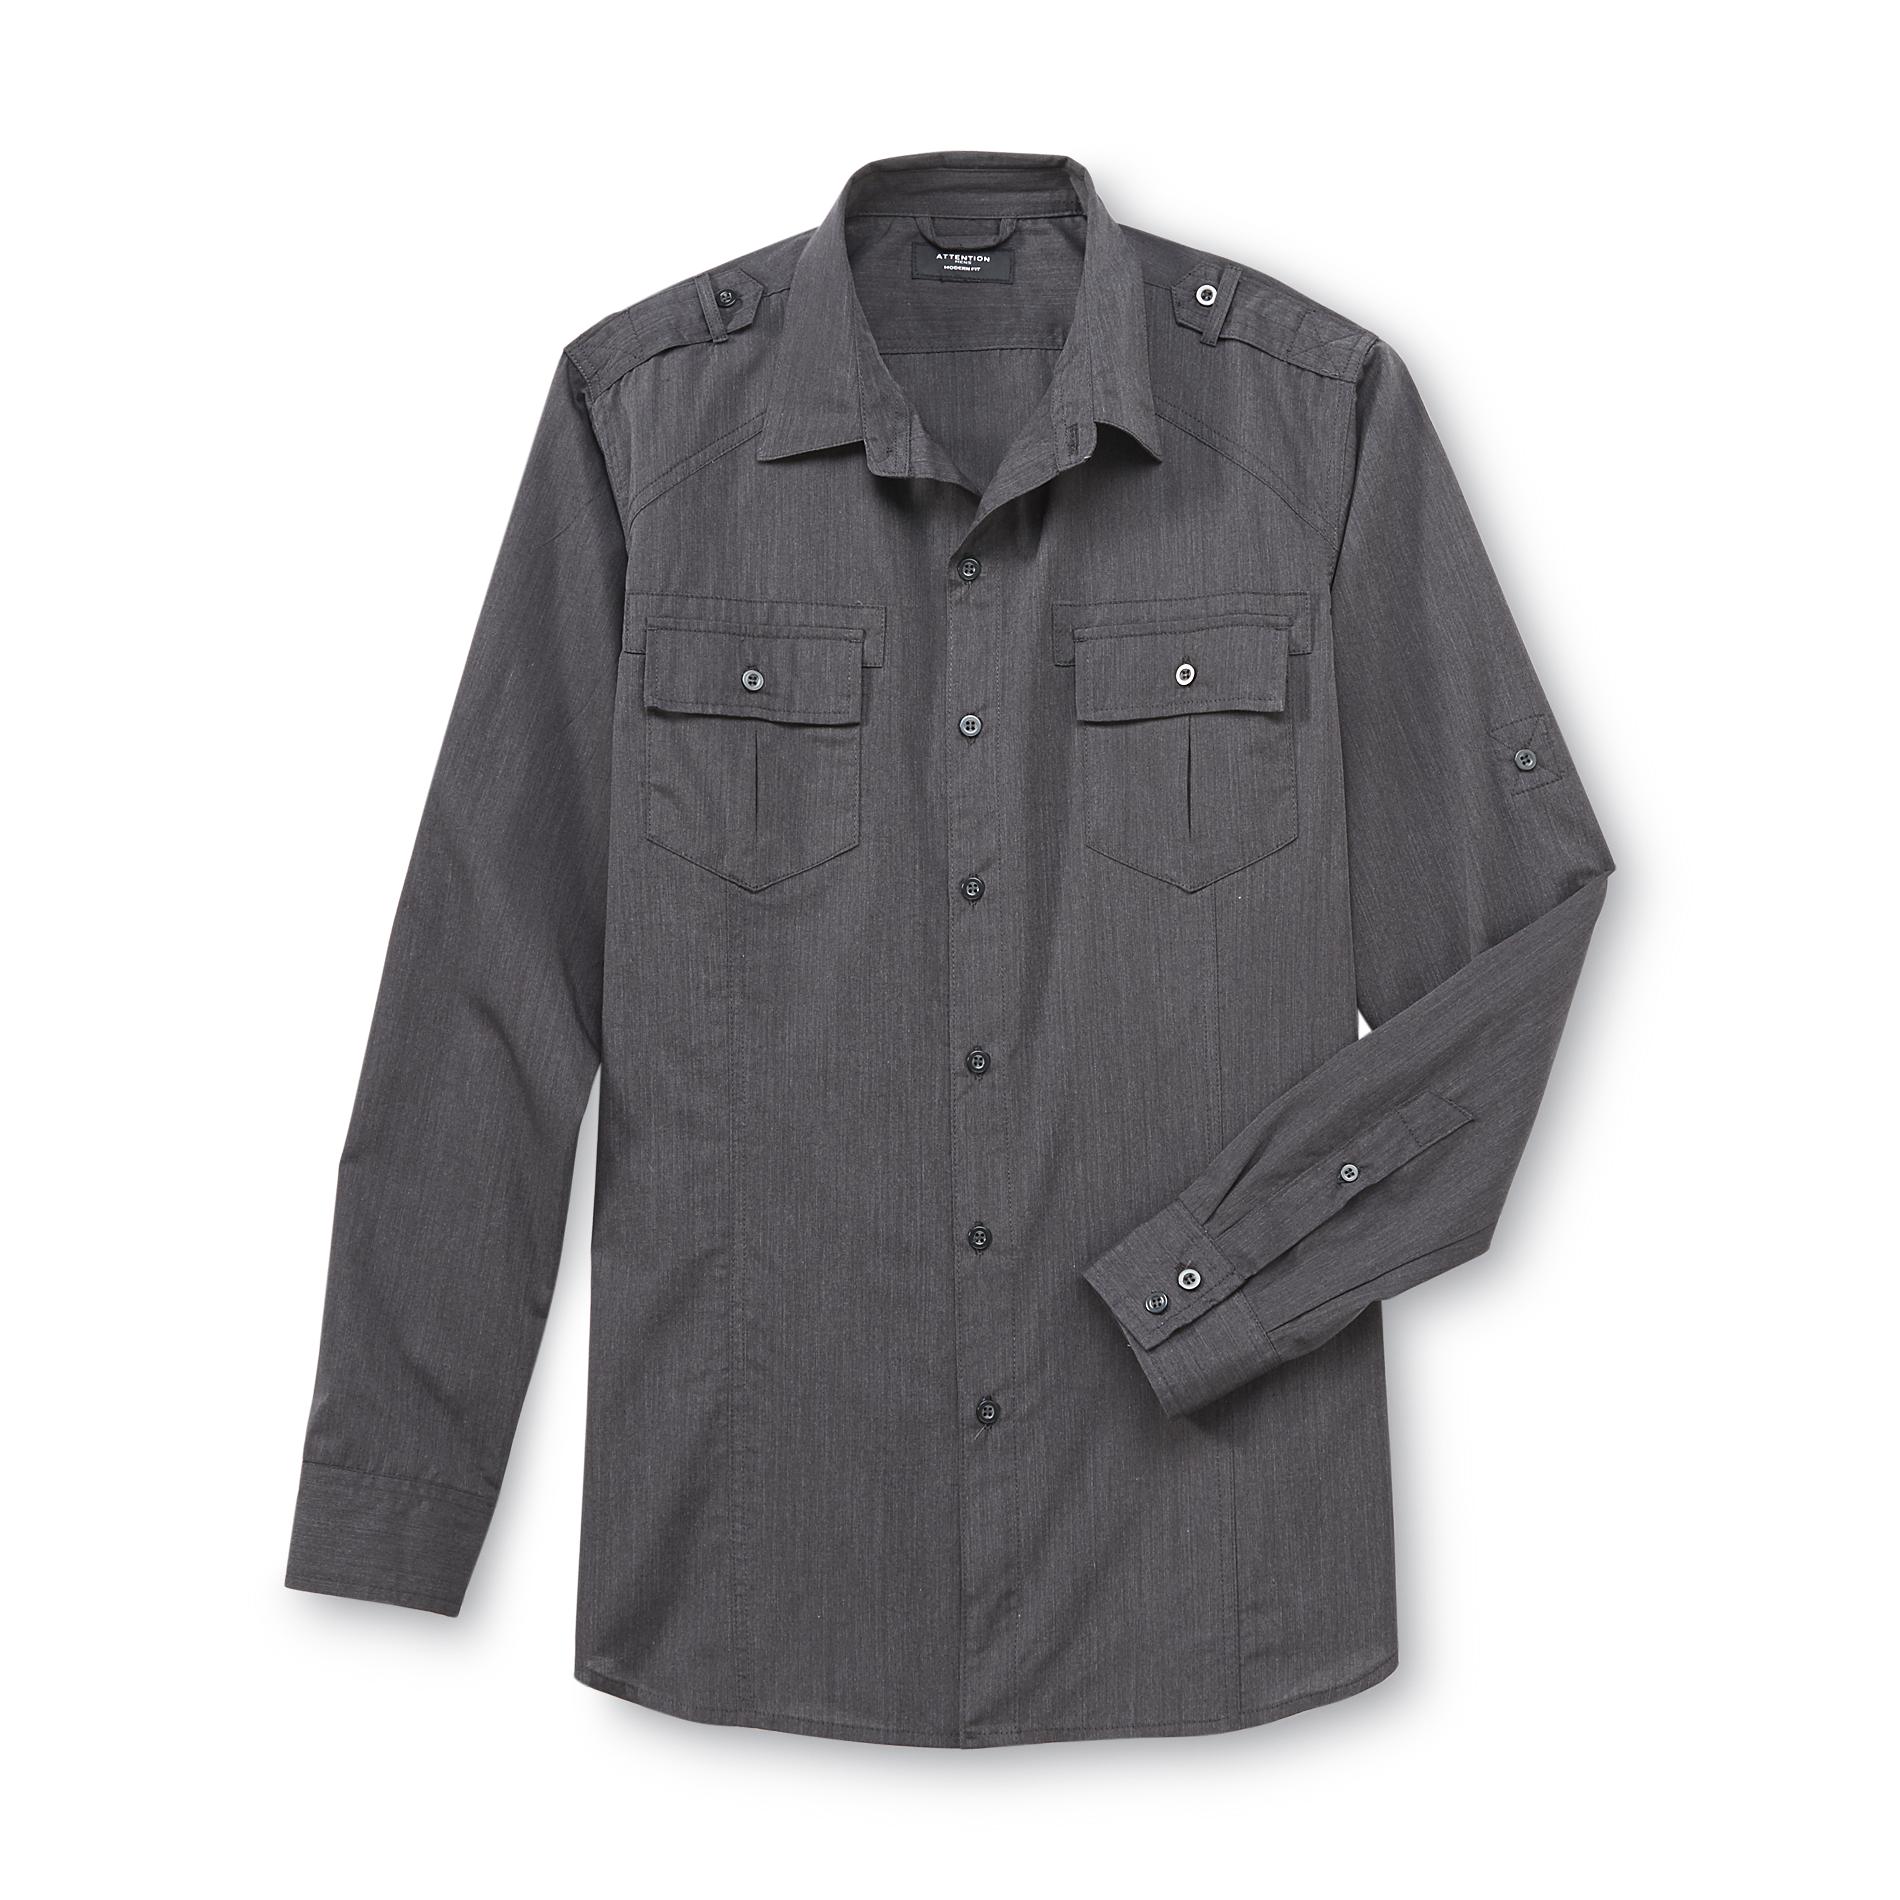 Attention Men's Modern Fit Button-Front Shirt - Heathered